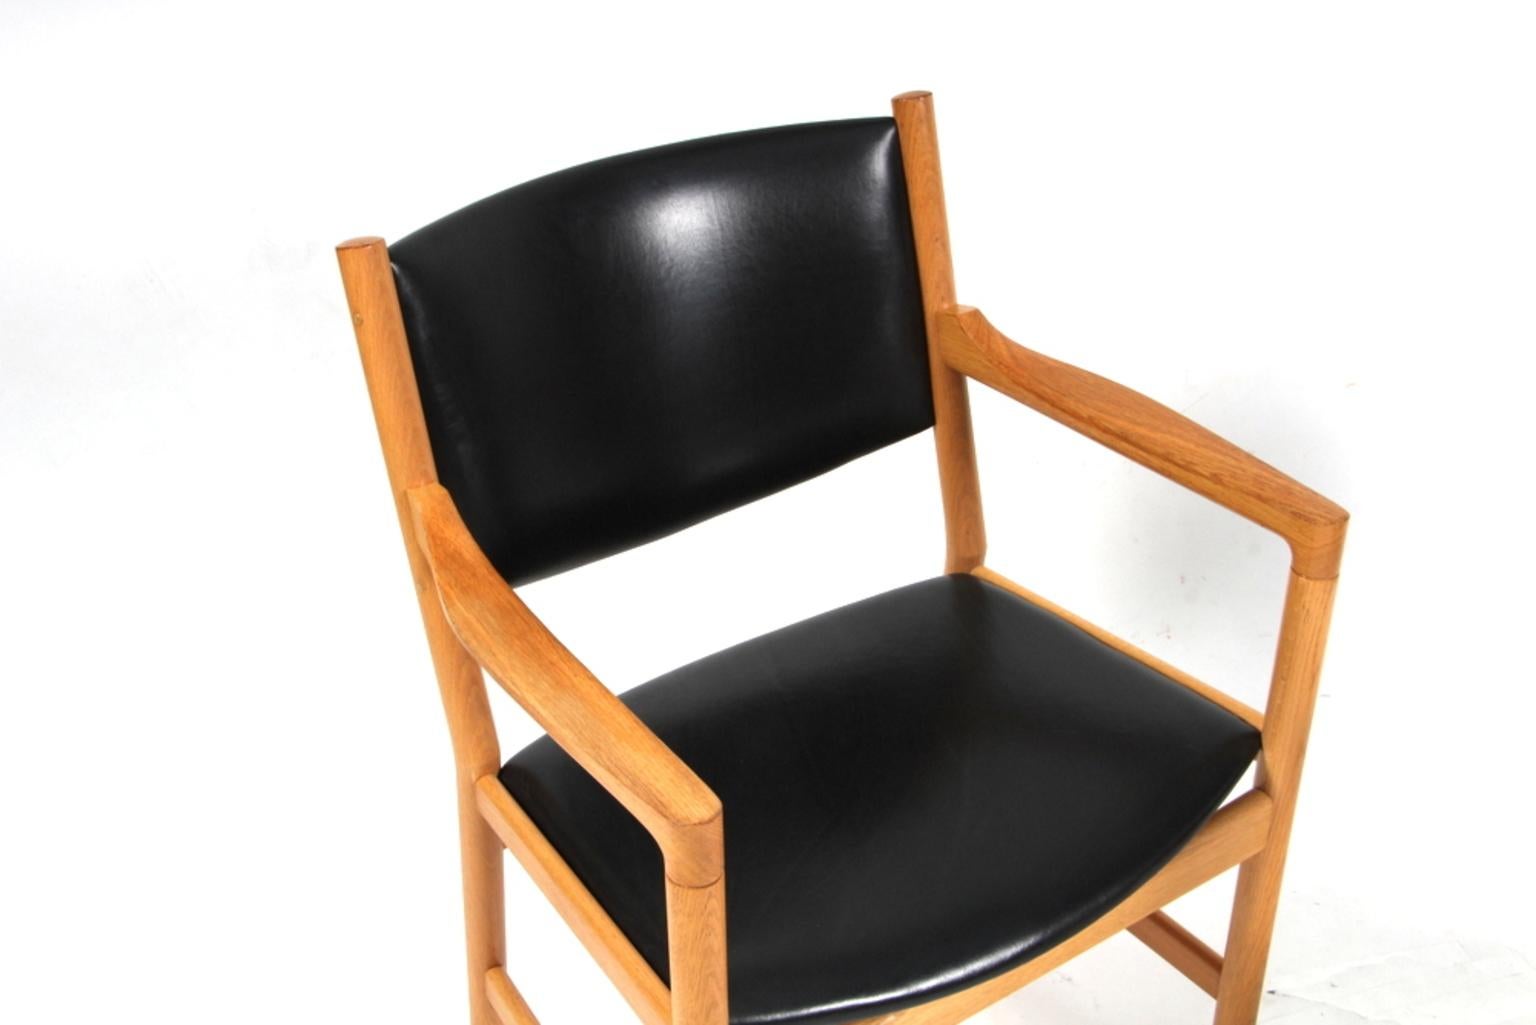 Hans J. Wegner lounge / arm chair in massive oak.

Seat and back upholstered with black aniline leather.

Model JH 872, made by Johannes Hansen. 

This is a very rare model but with Wegner's classic design.